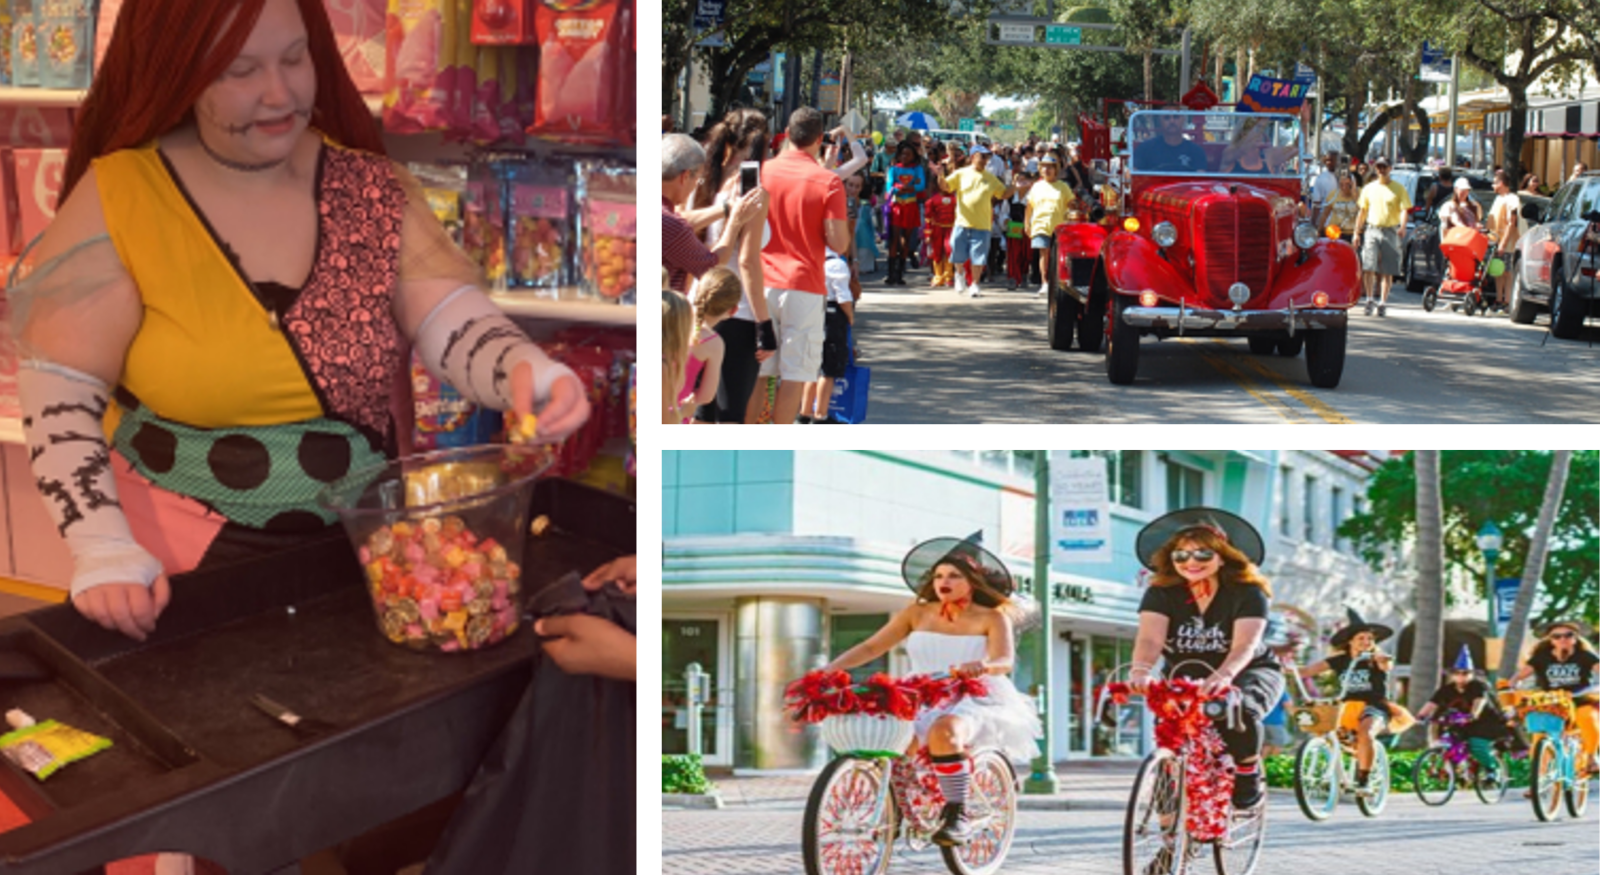 Halloween Happenings in The Palm Beaches